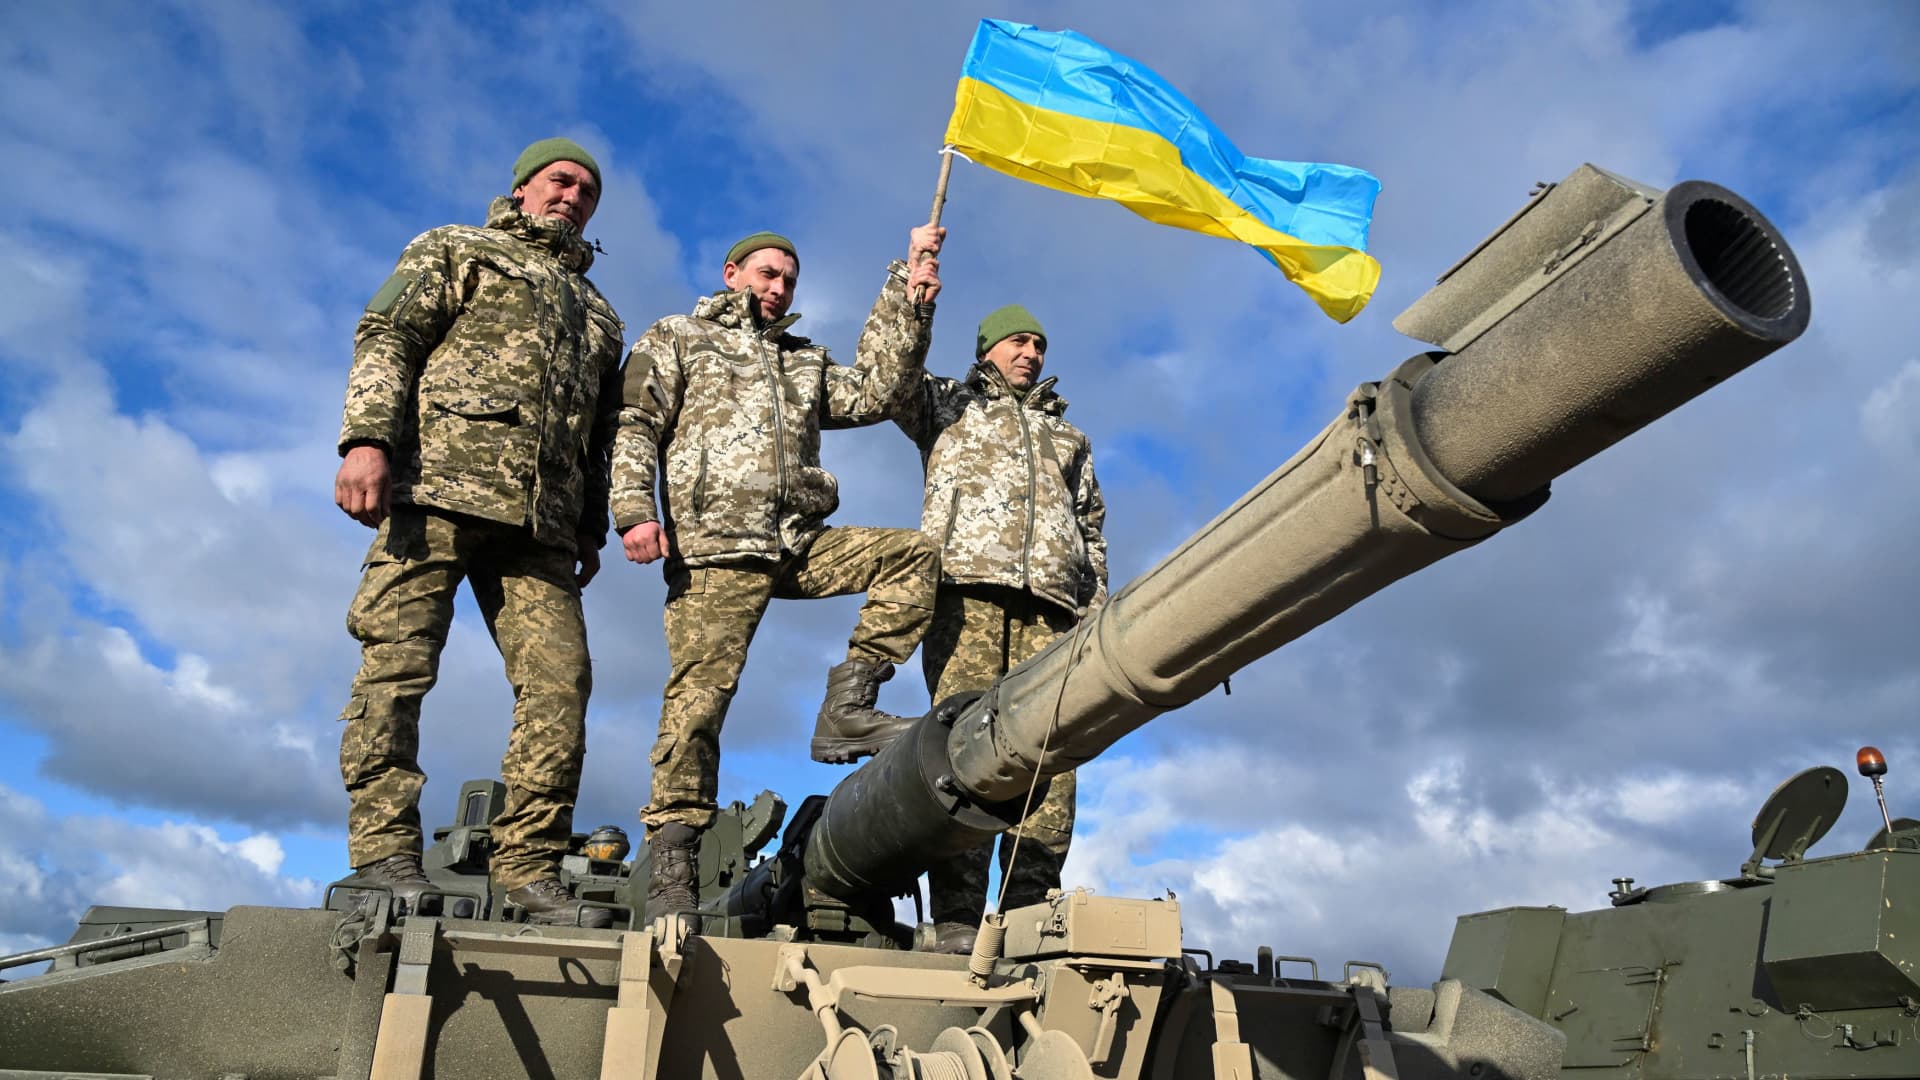 Ukrainian personnel on top of a Challenger 2 tank during training at Bovington Camp, near Wool in southwestern Britain, on Feb. 22, 2023.